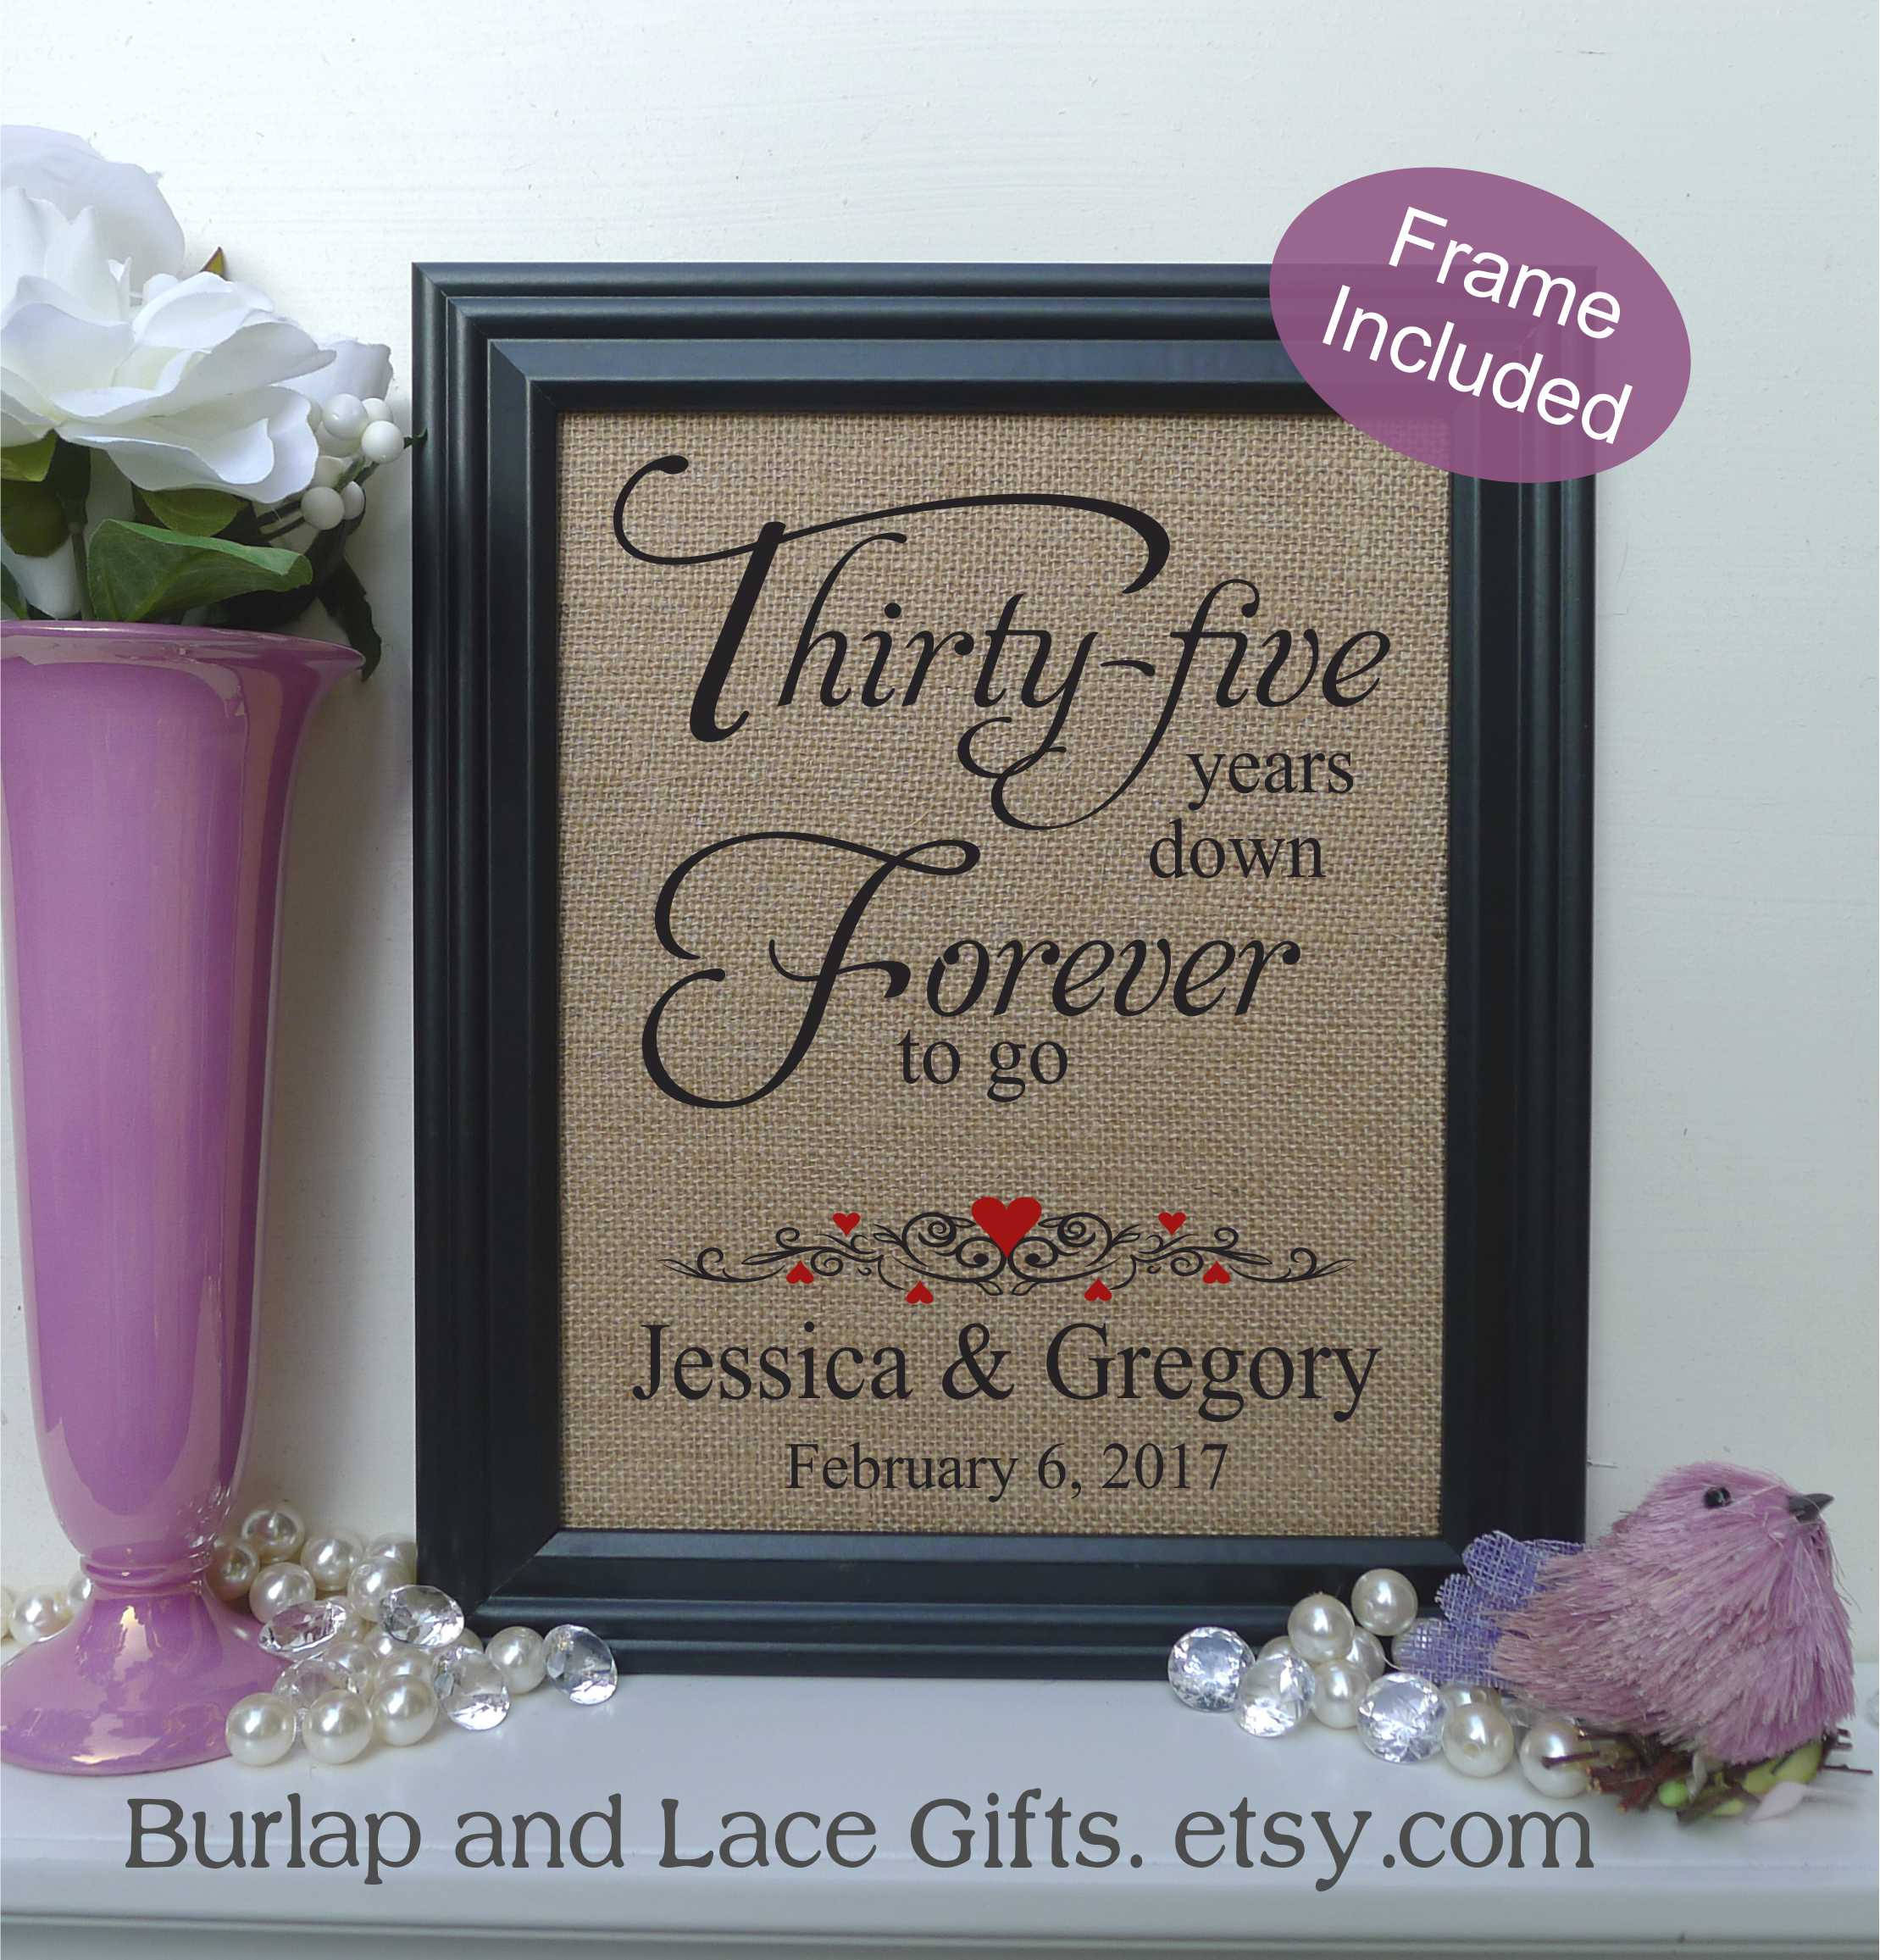 35Th Anniversary Gift Ideas
 FRAMED Personalized 35th Anniversary Gift 35 years of